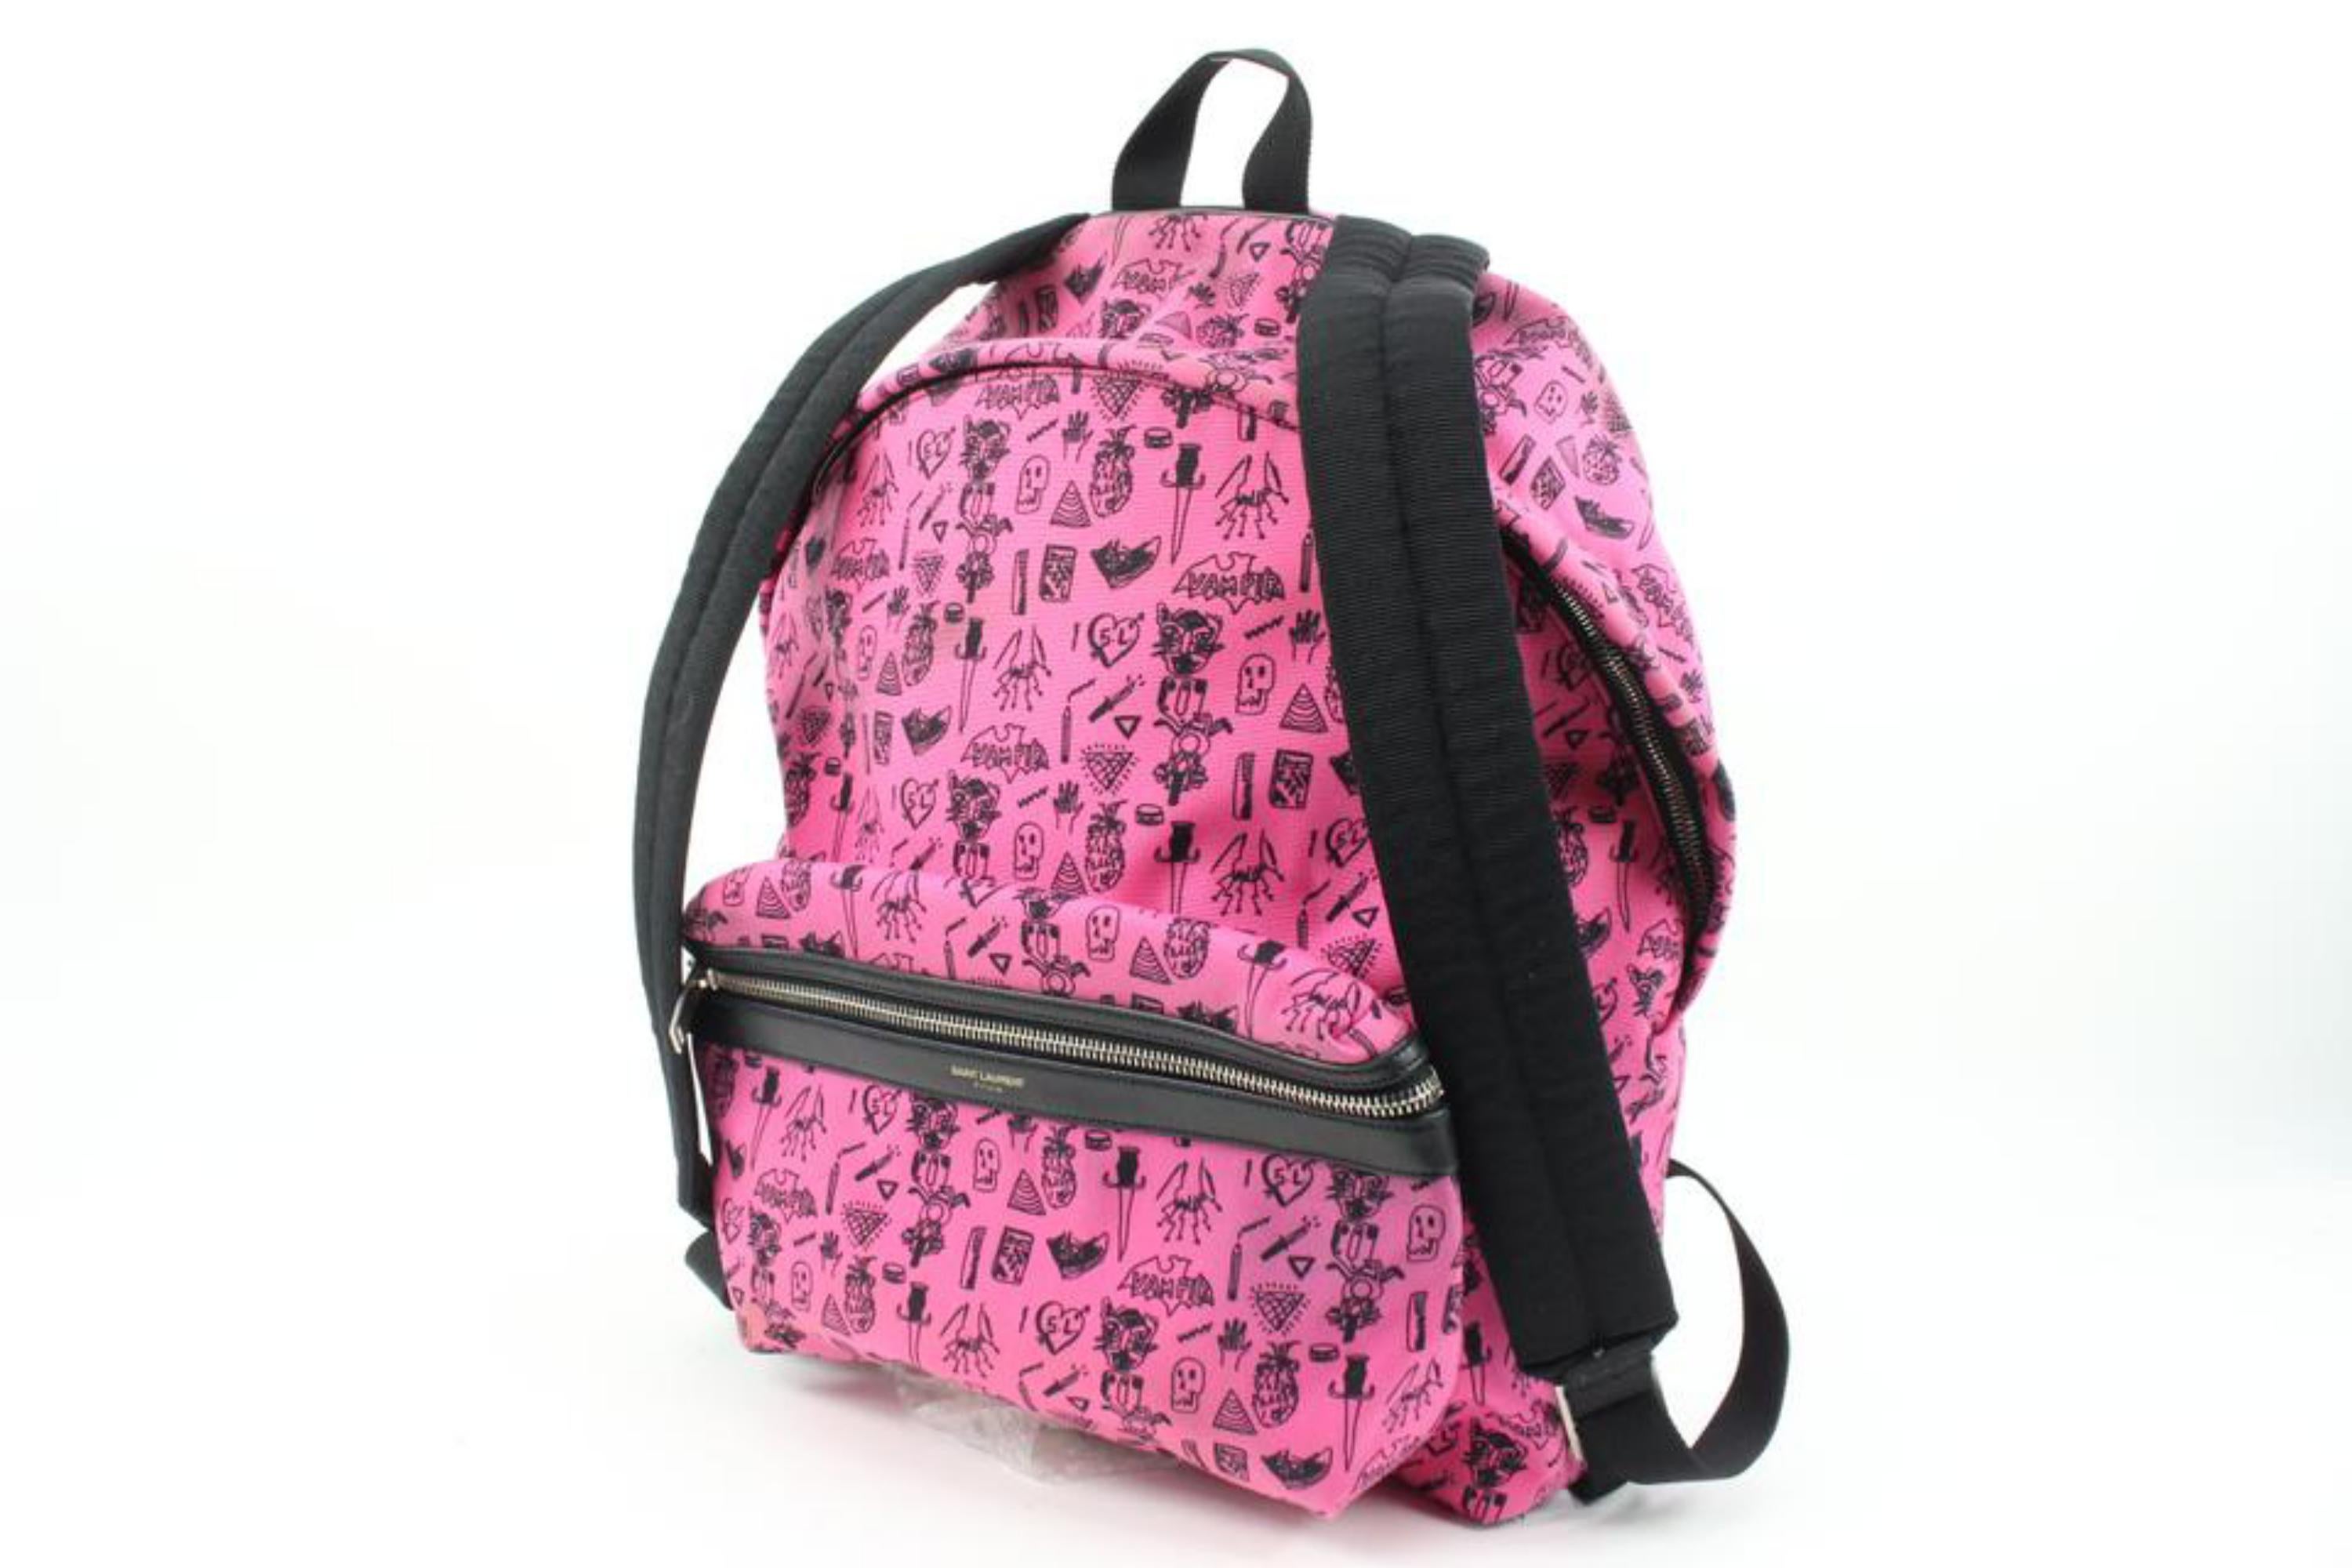 Saint Laurent Hot Pink Doodle Print City Backpack 54ys23s
Date Code/Serial Number: IND326865-0514
Made In: Italy
Measurements: Length:  15